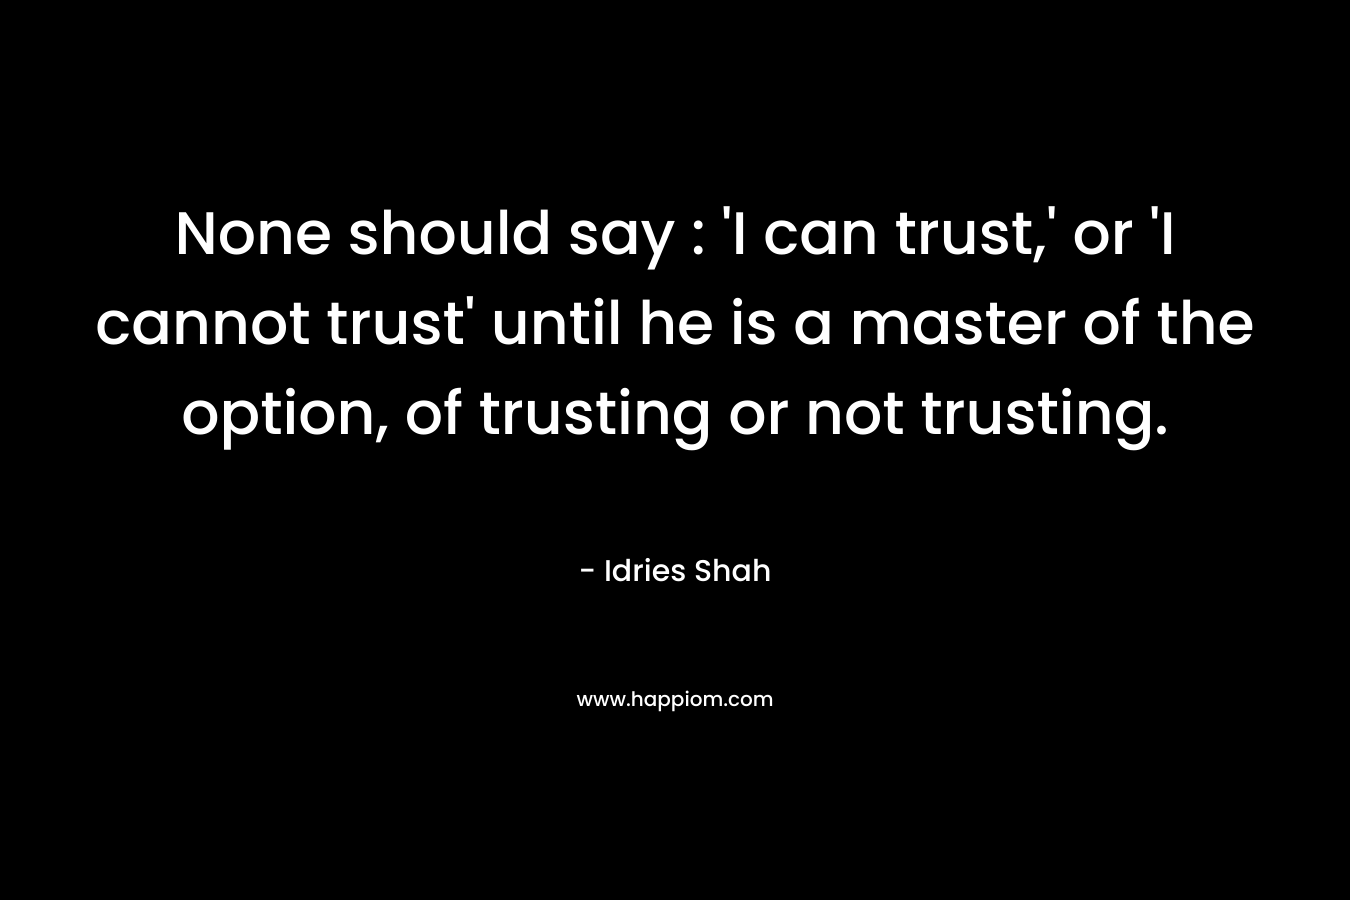 None should say : ‘I can trust,’ or ‘I cannot trust’ until he is a master of the option, of trusting or not trusting. – Idries Shah